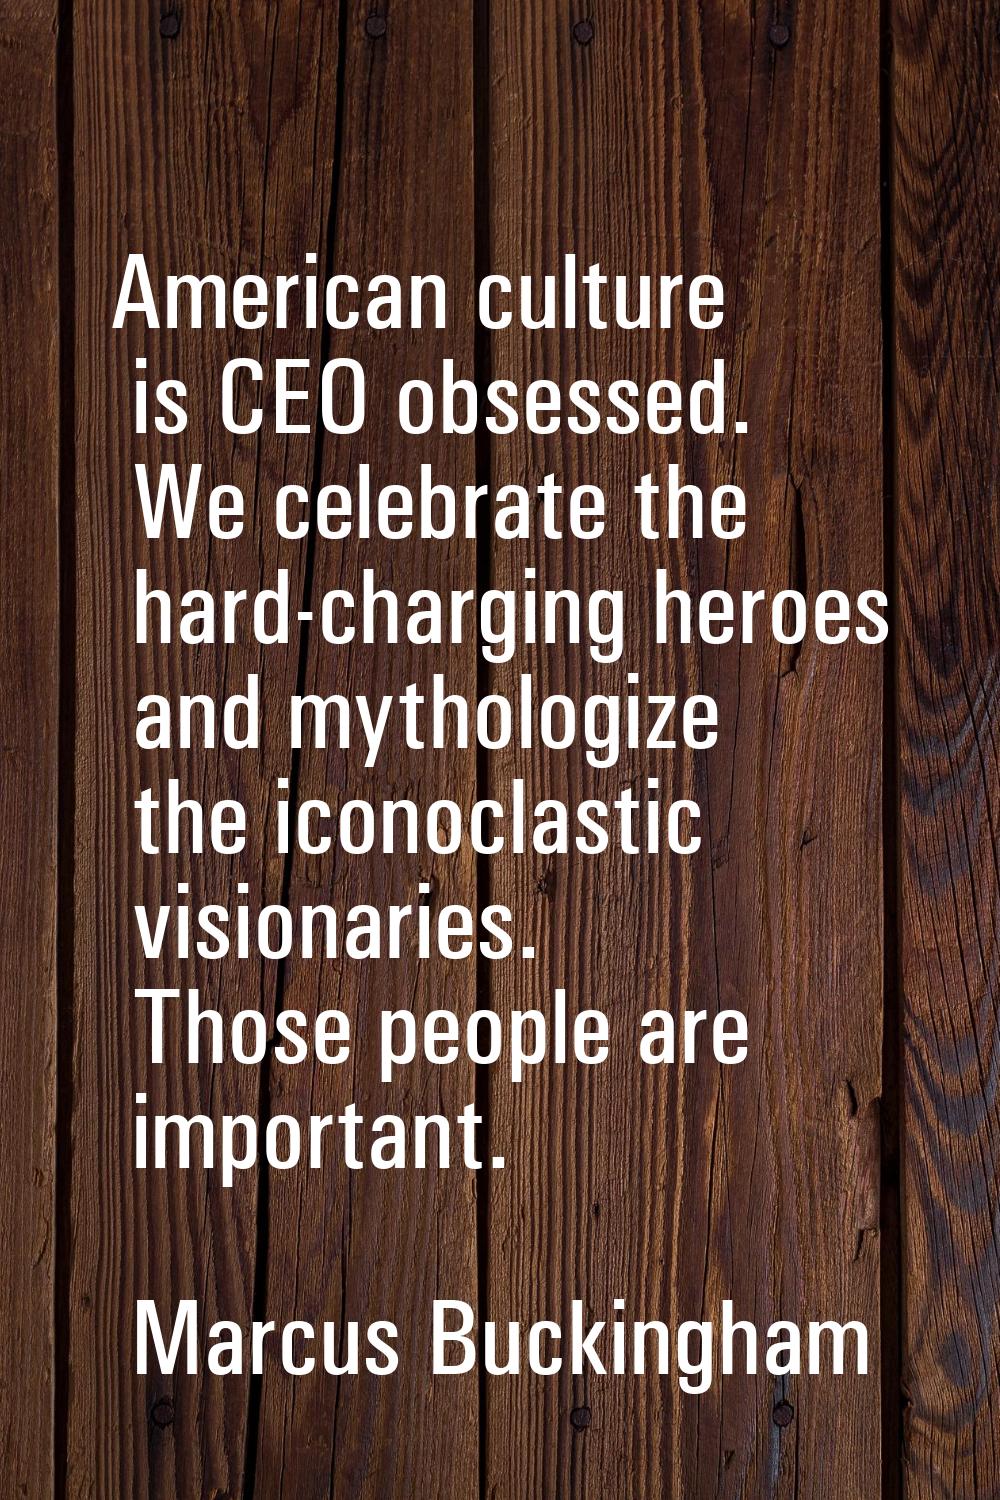 American culture is CEO obsessed. We celebrate the hard-charging heroes and mythologize the iconocl